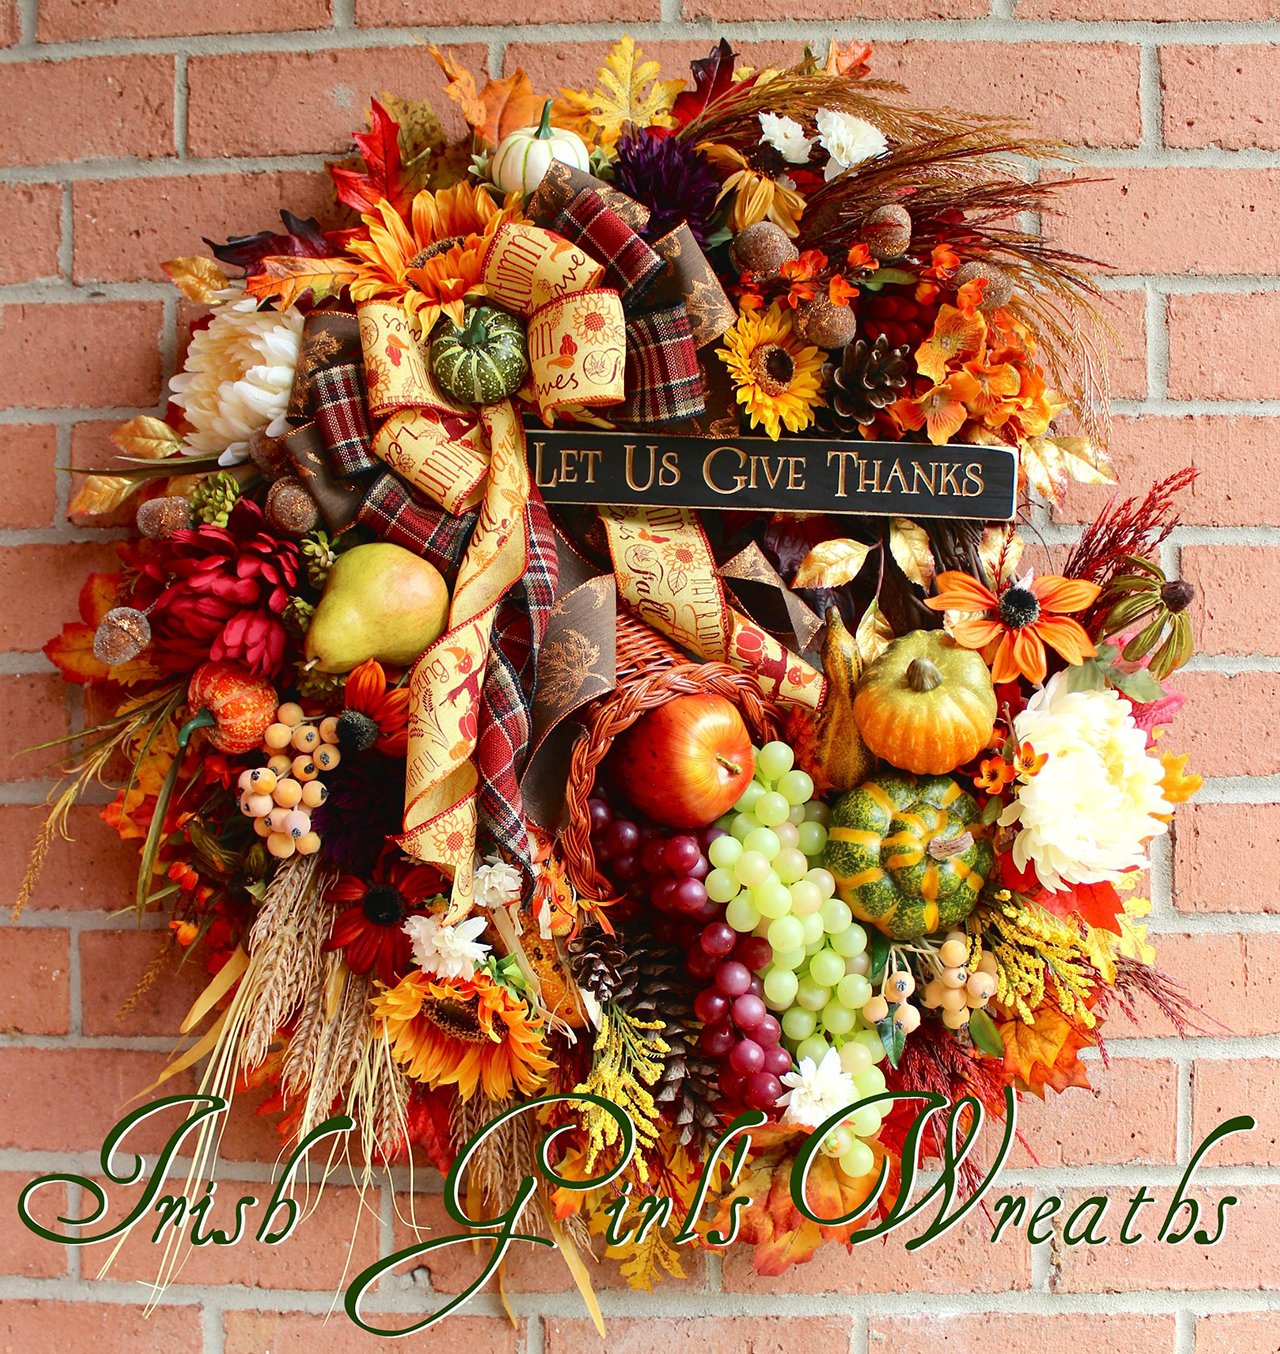 Gorgeous Wreath with Ribbon, Flowers, Leaves and Gourds